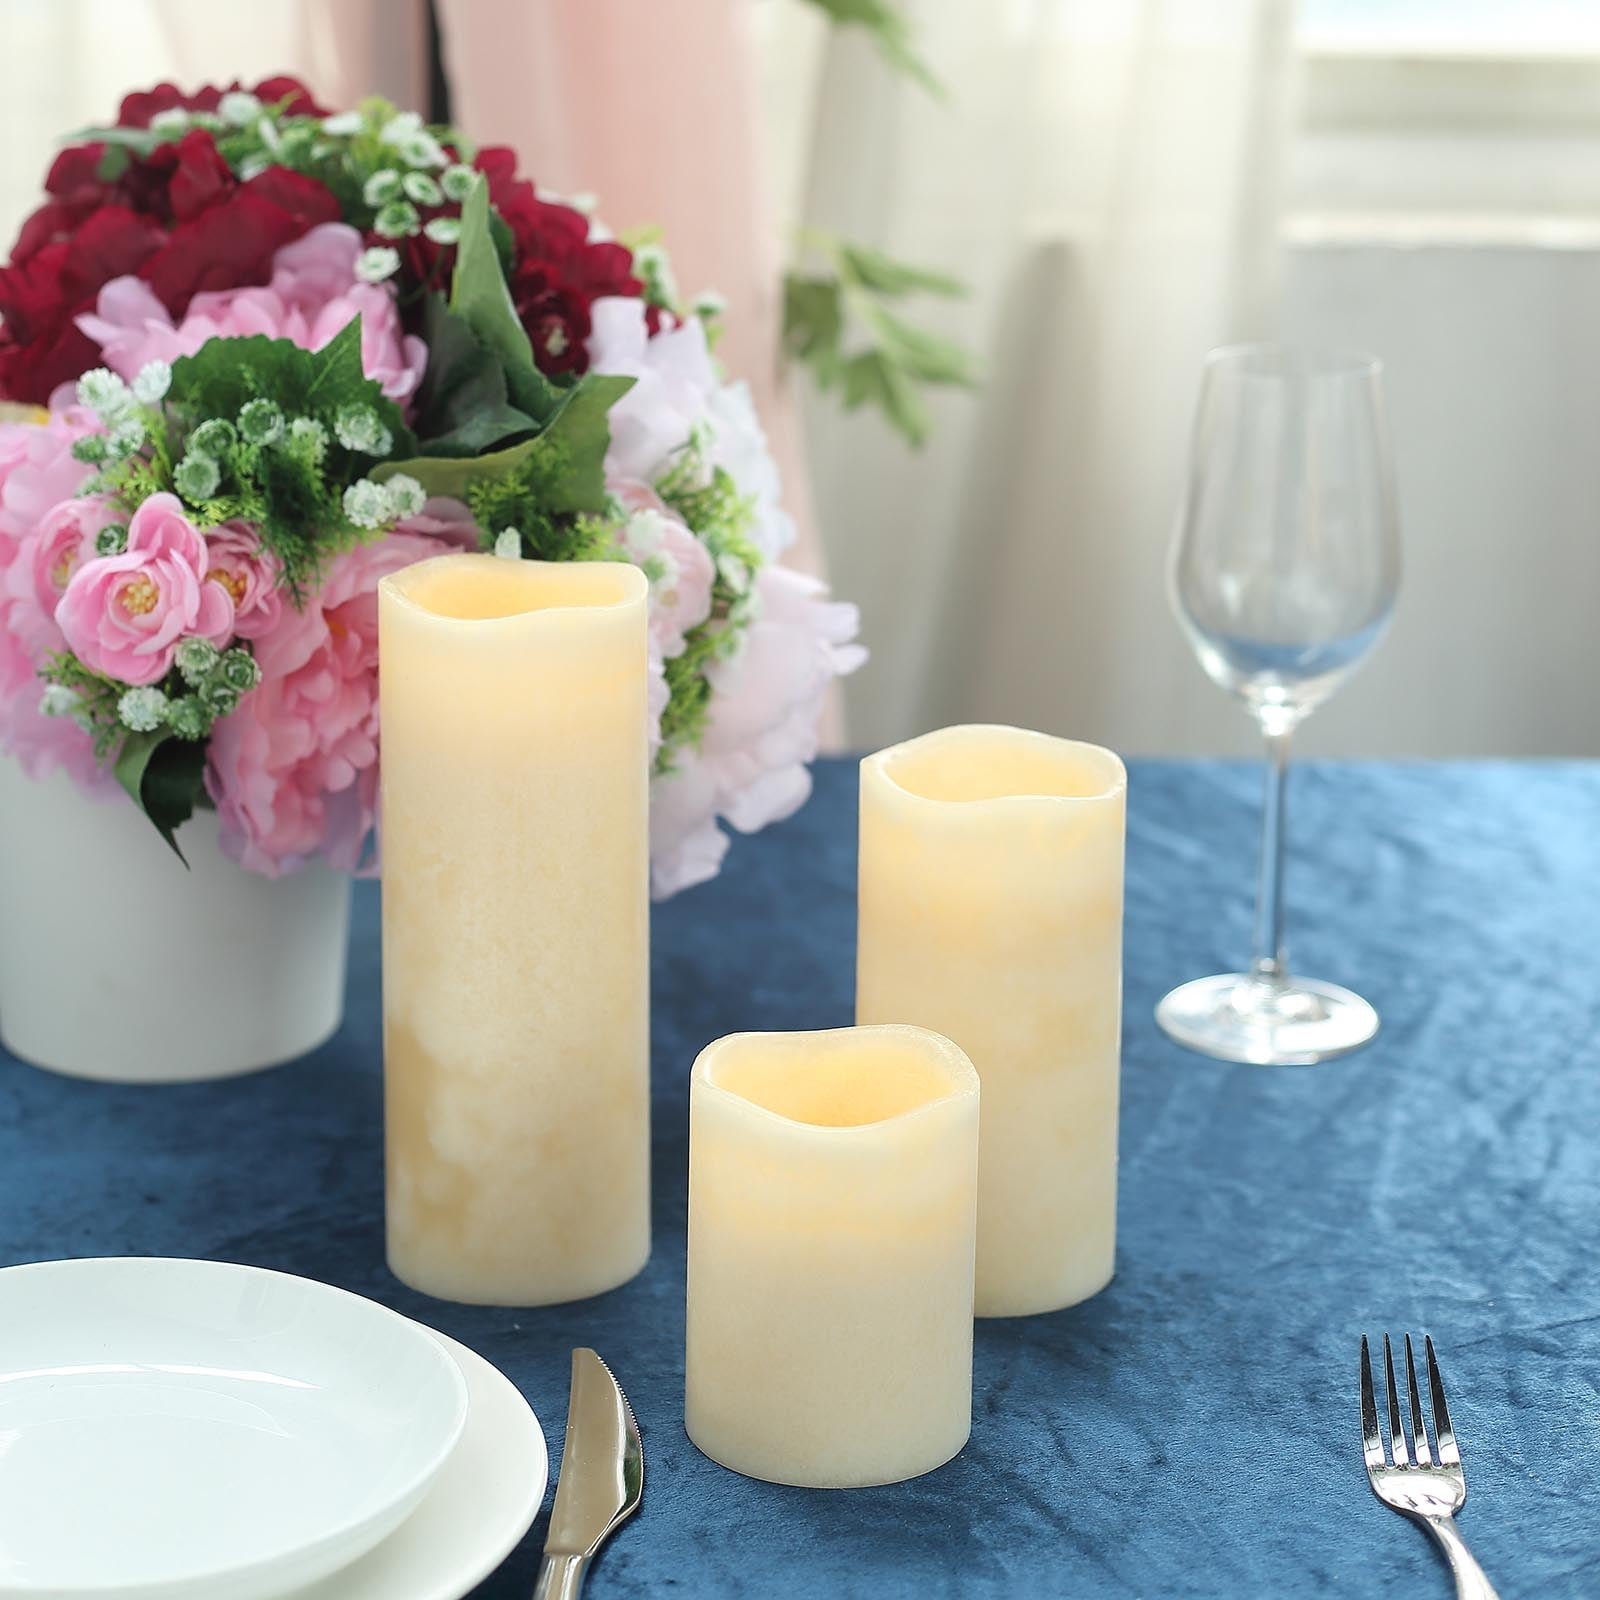 FLAMELESS LED CANDLE WARM WHITE MOVING DANCING WICK ELECTRIC CANDLES WEDDING AU 